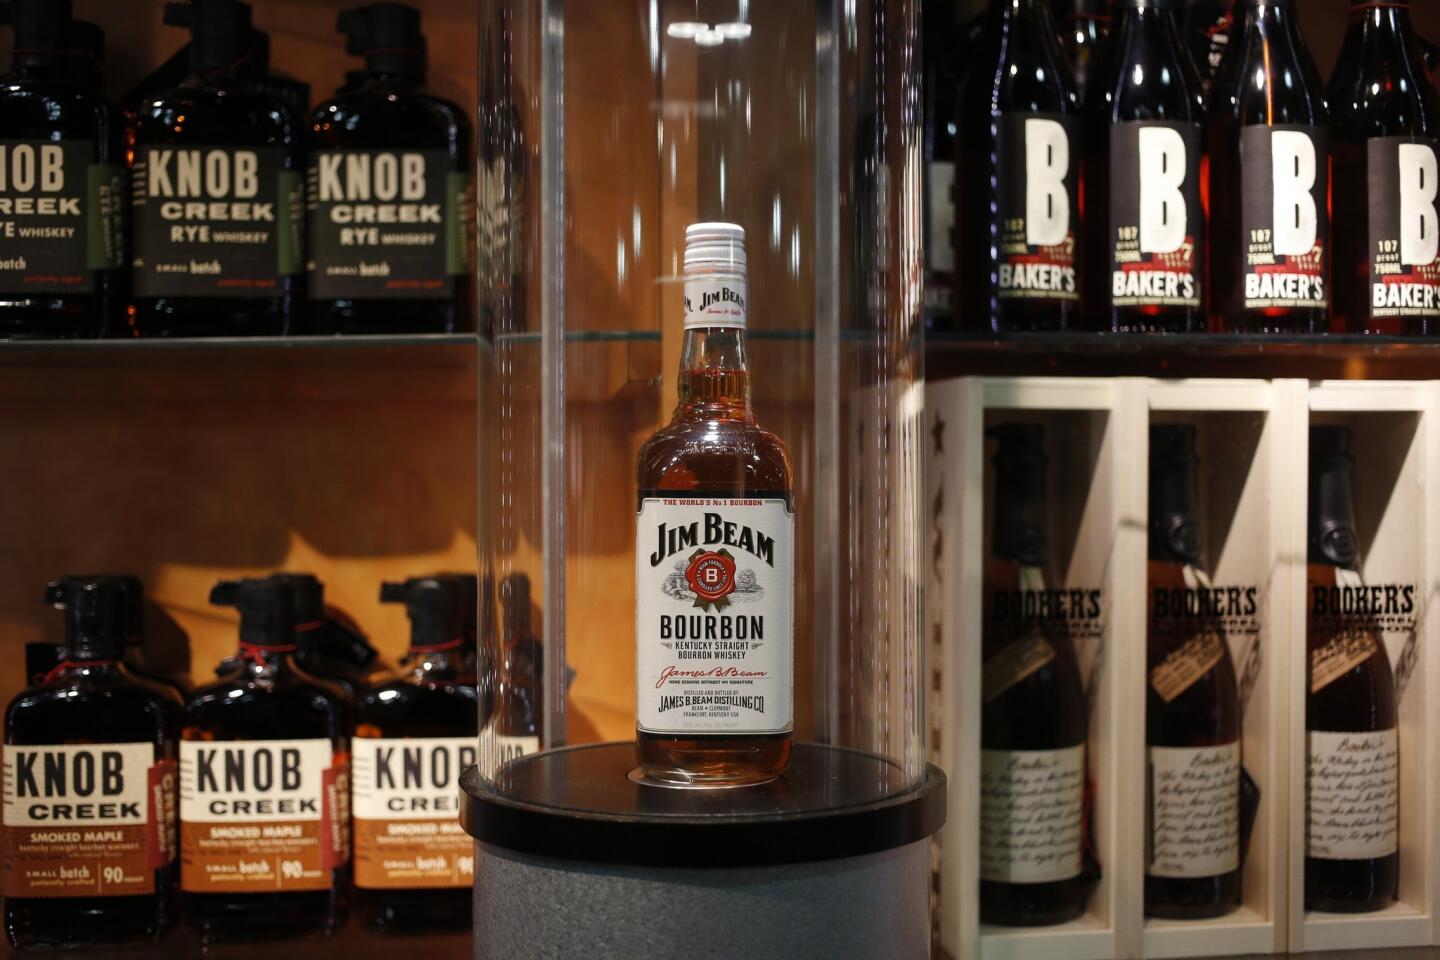 Bottles of Jim Beam Bourbon are displayed for sale inside the gift shop at the Jim Beam bourbon distillery. Japanese company Suntory Holdings recently acquired Beam Inc. for $13.6 billion.